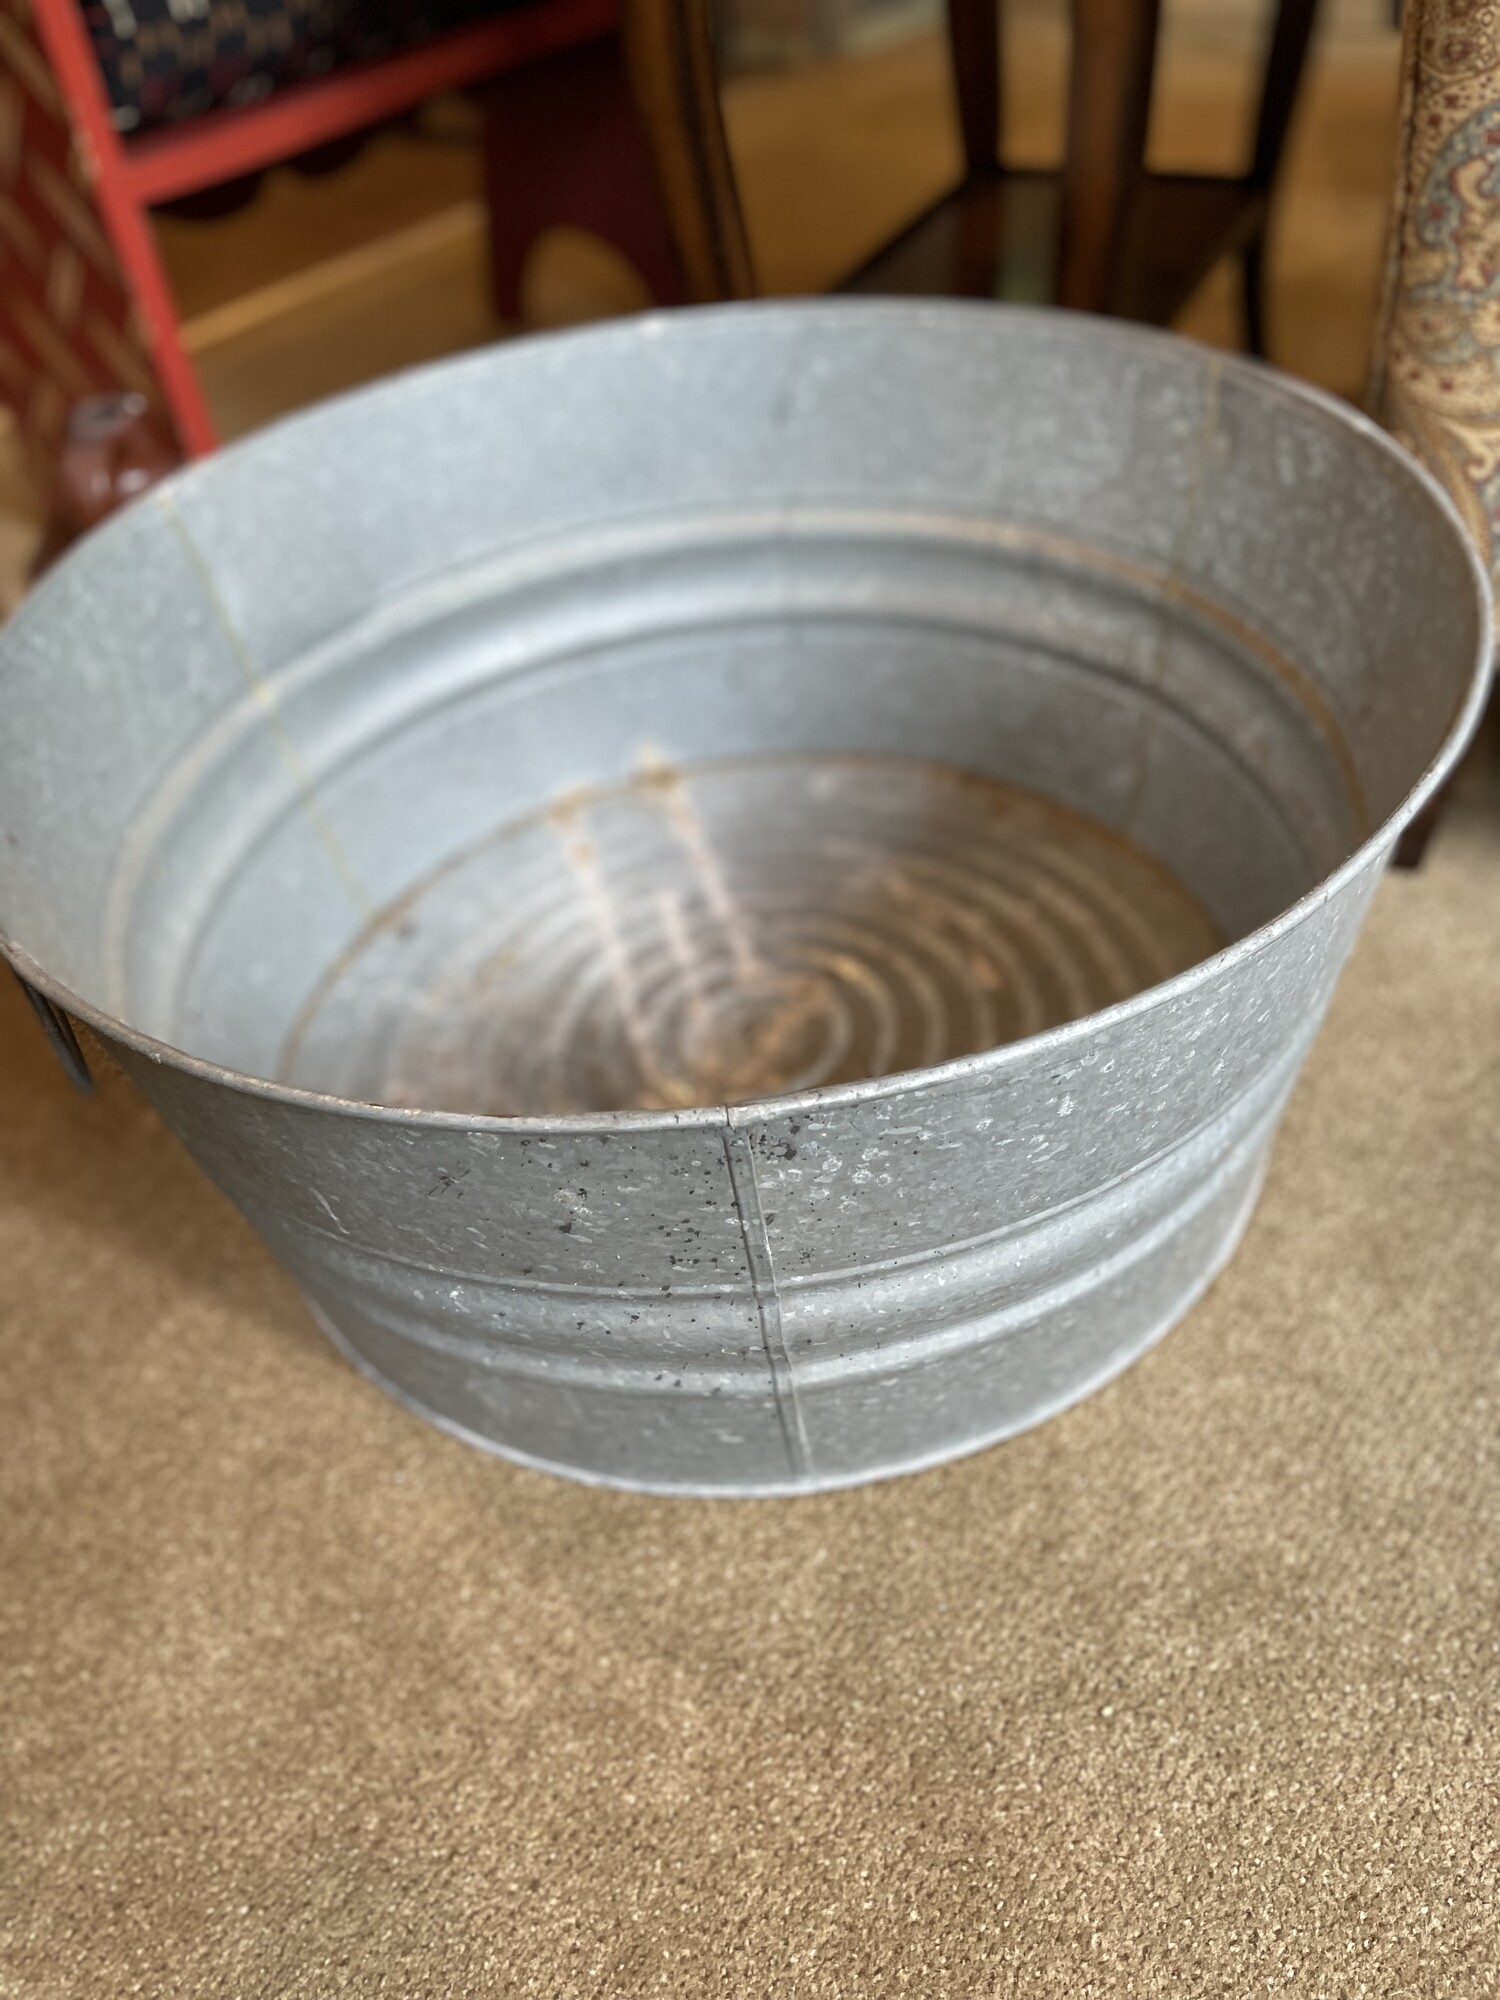 Galvanized Wash Tub
11 x 24
Excellent condition - perfect inside
or out!